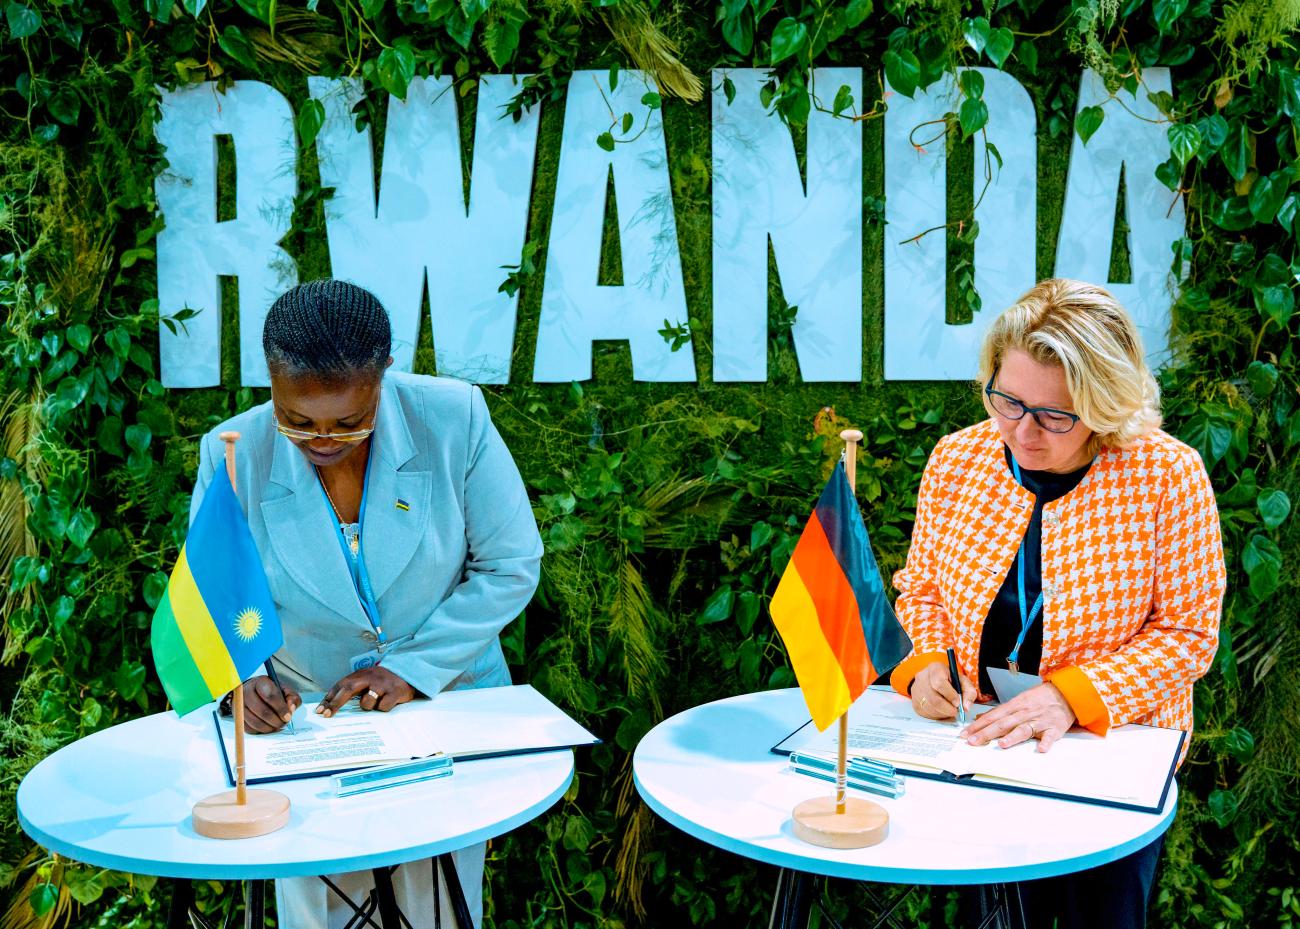 Rwanda’s Minister of Environment signing an NDC facility partnership with Germany’s Federal Minister of Economic Cooperation and Development at COP 27 in Sharm el-Sheikh, Egypt